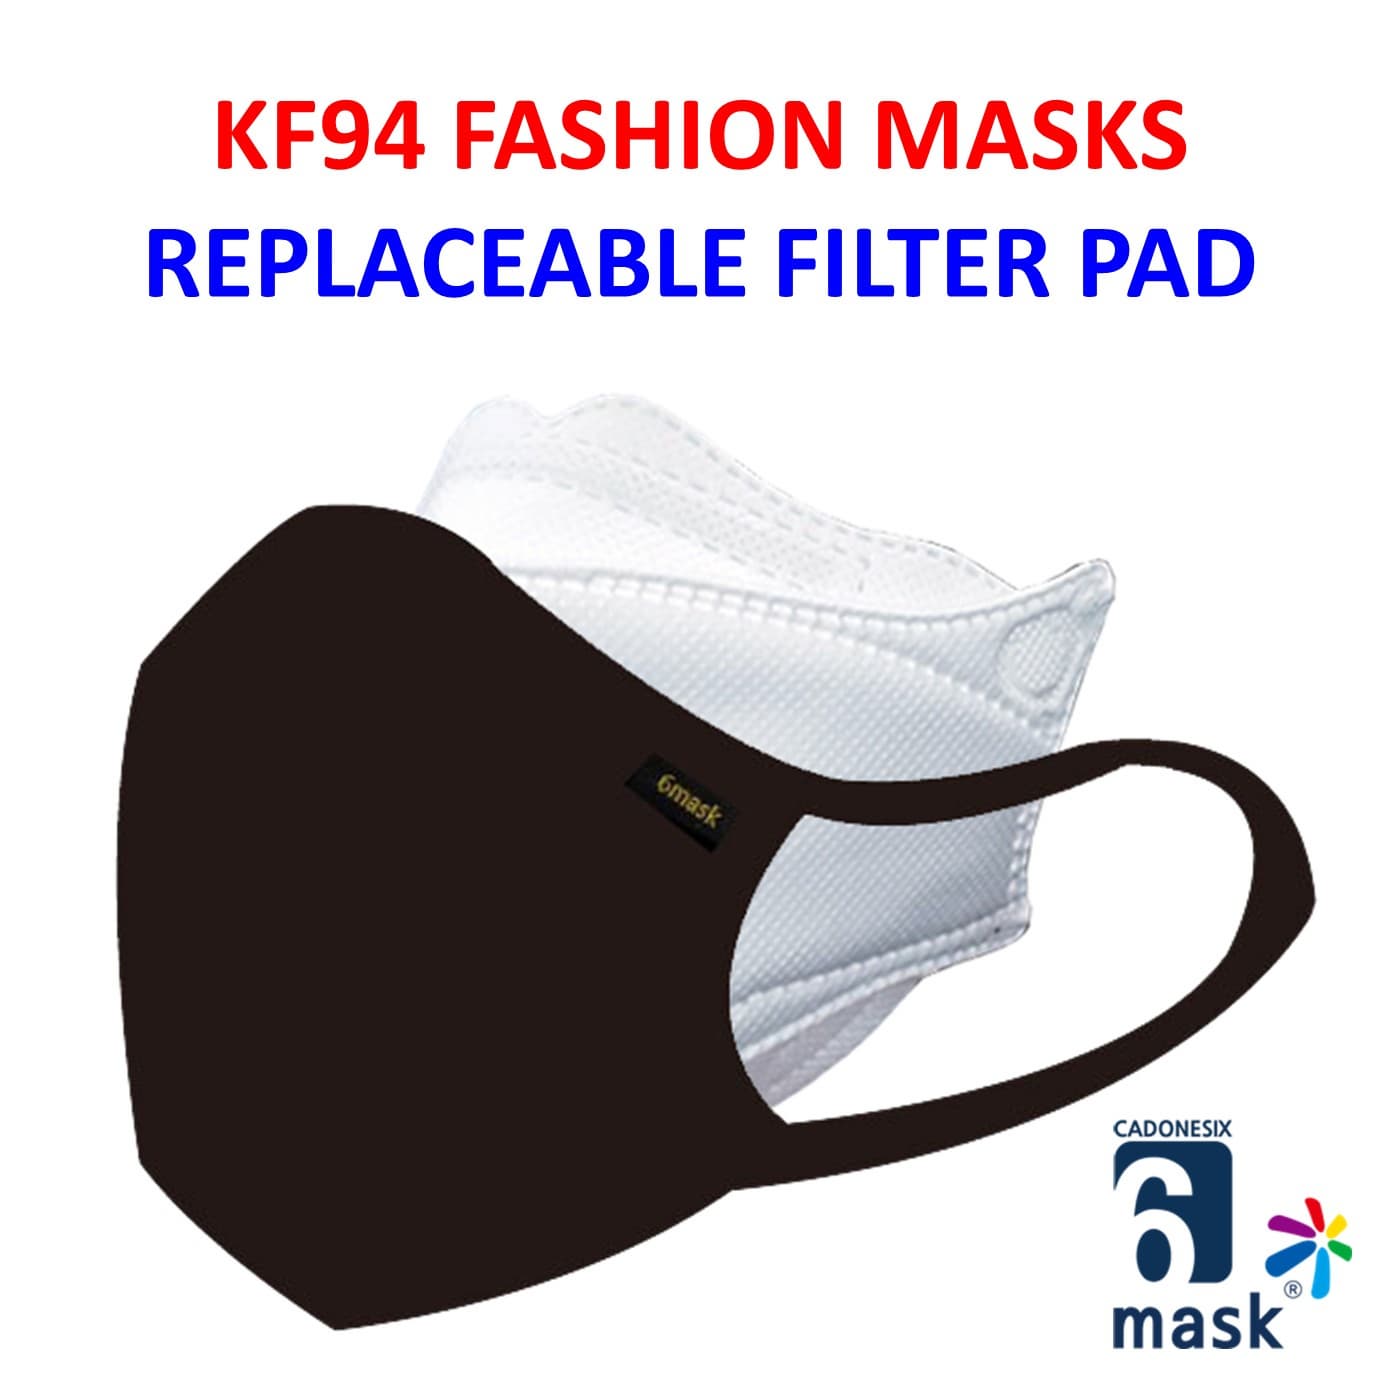 Fashion Face Mask with Replaceable KF94 Filter Pad